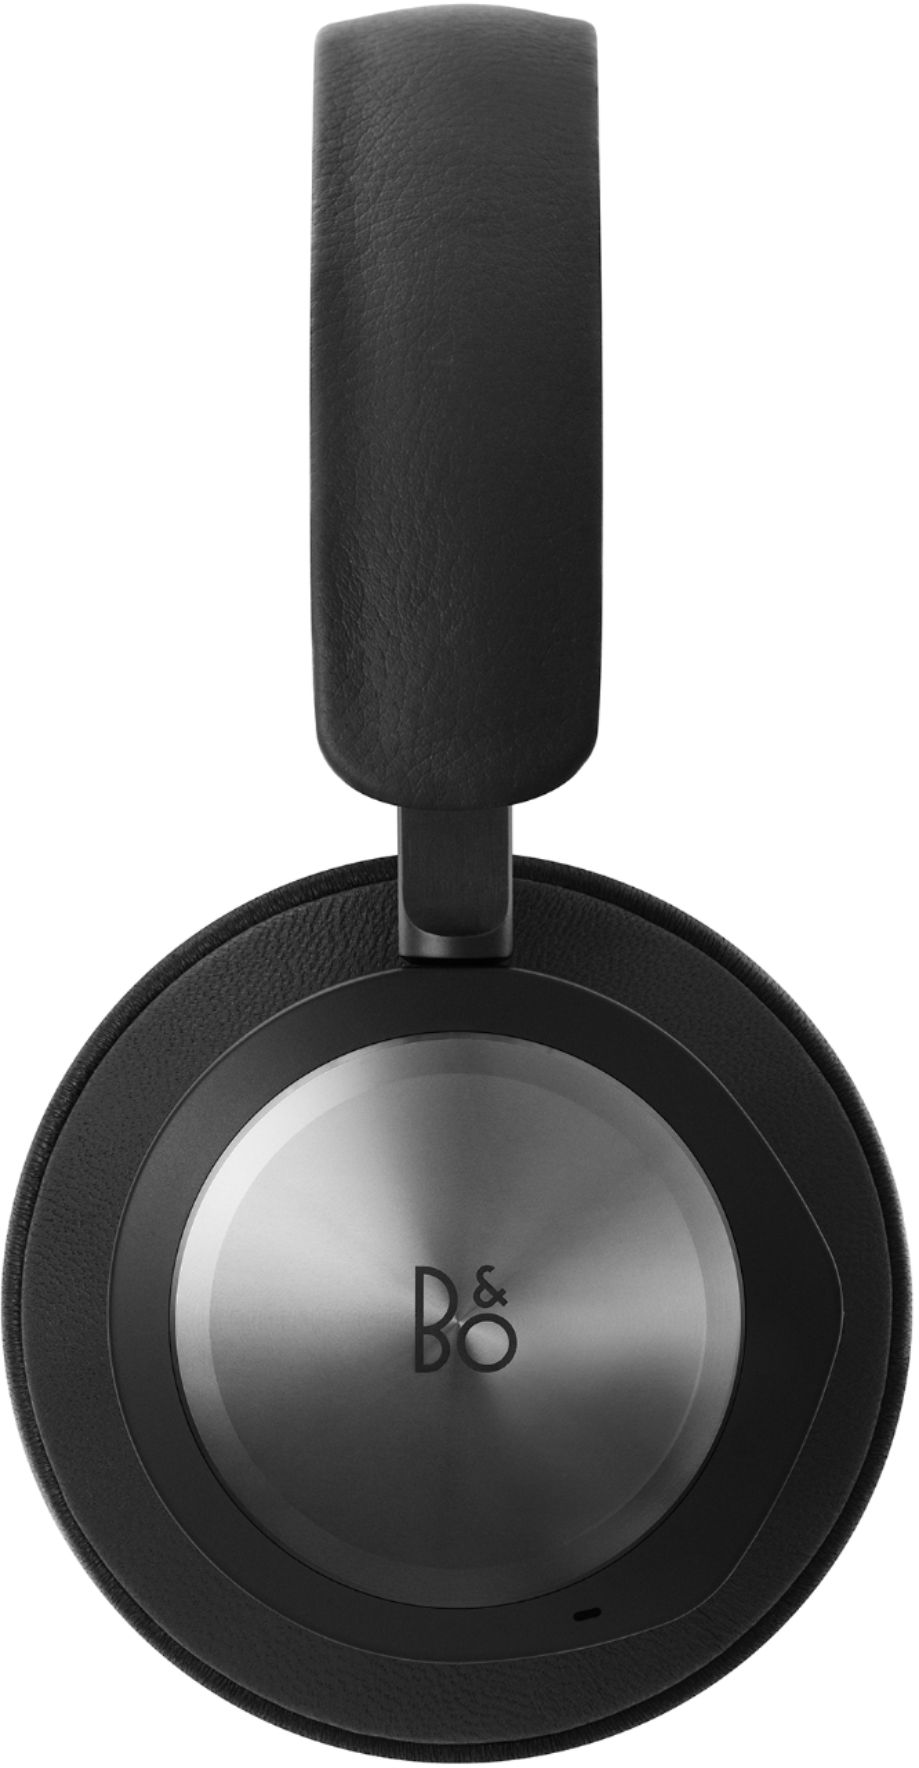 Bang & Portal Xbox Wireless Noise Cancelling Over-the-Ear Headphones Black Anthracite 3210 - Best Buy